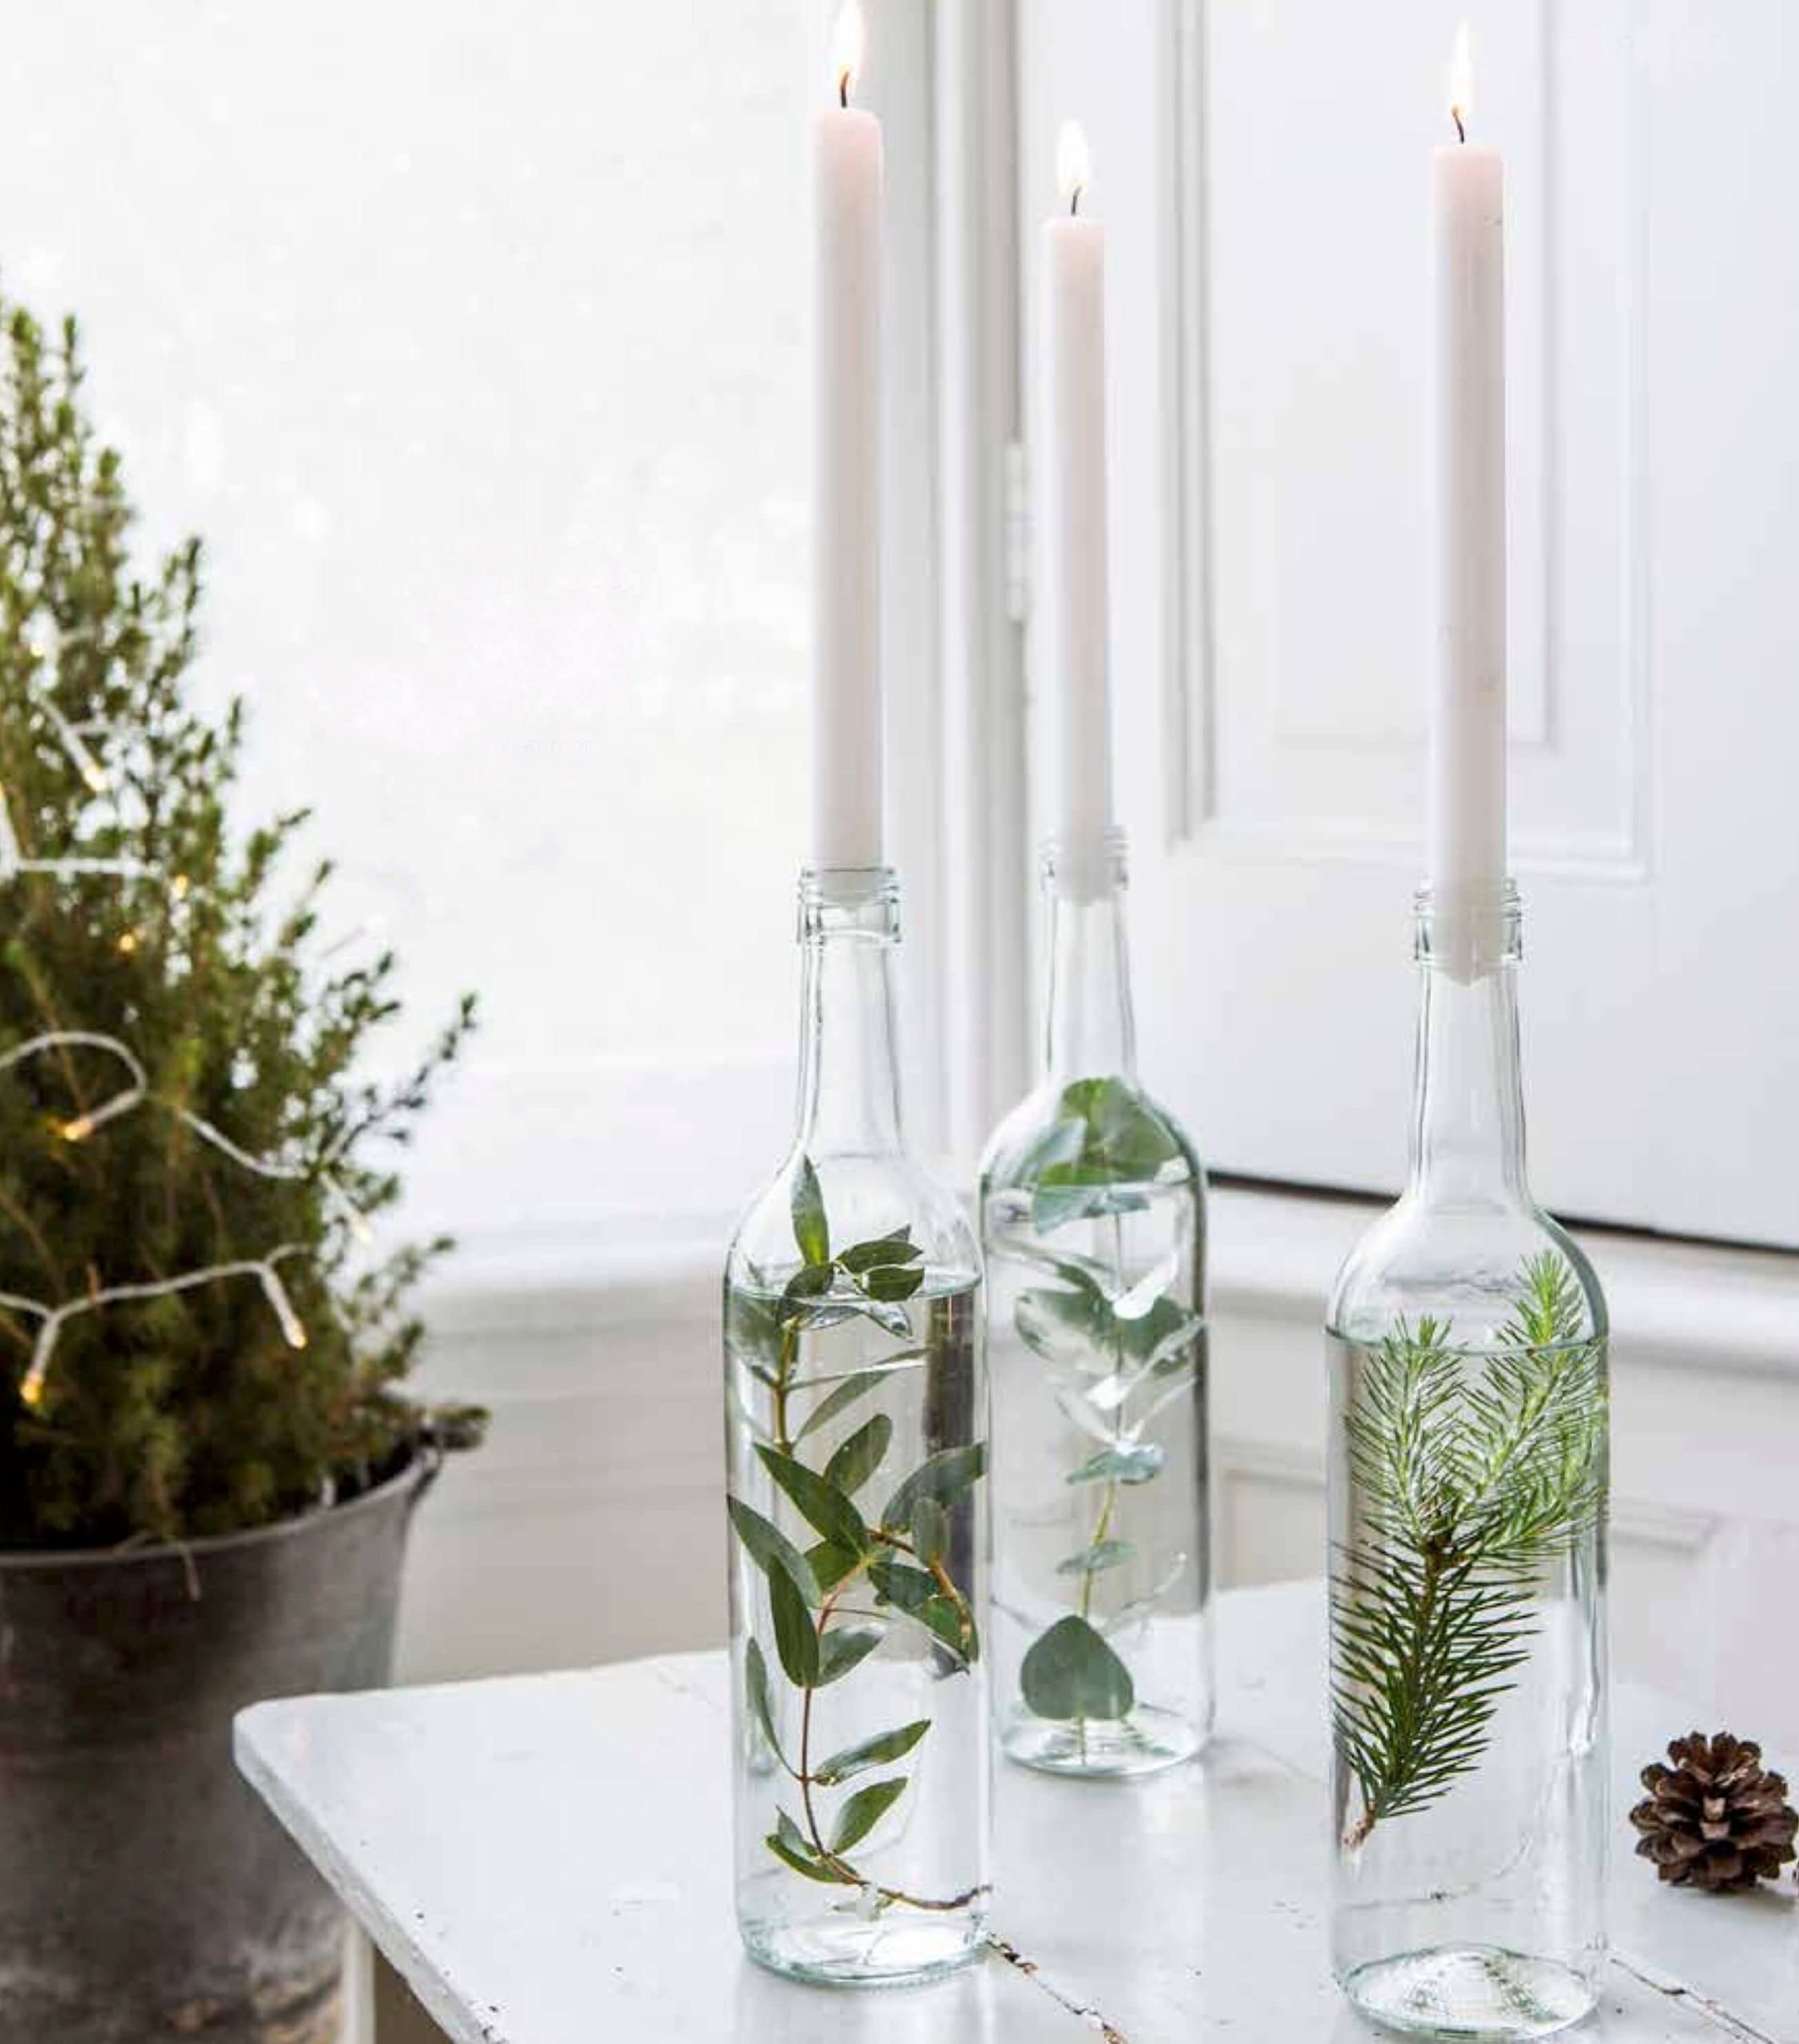 Candlesticks with bottles and fir branches.